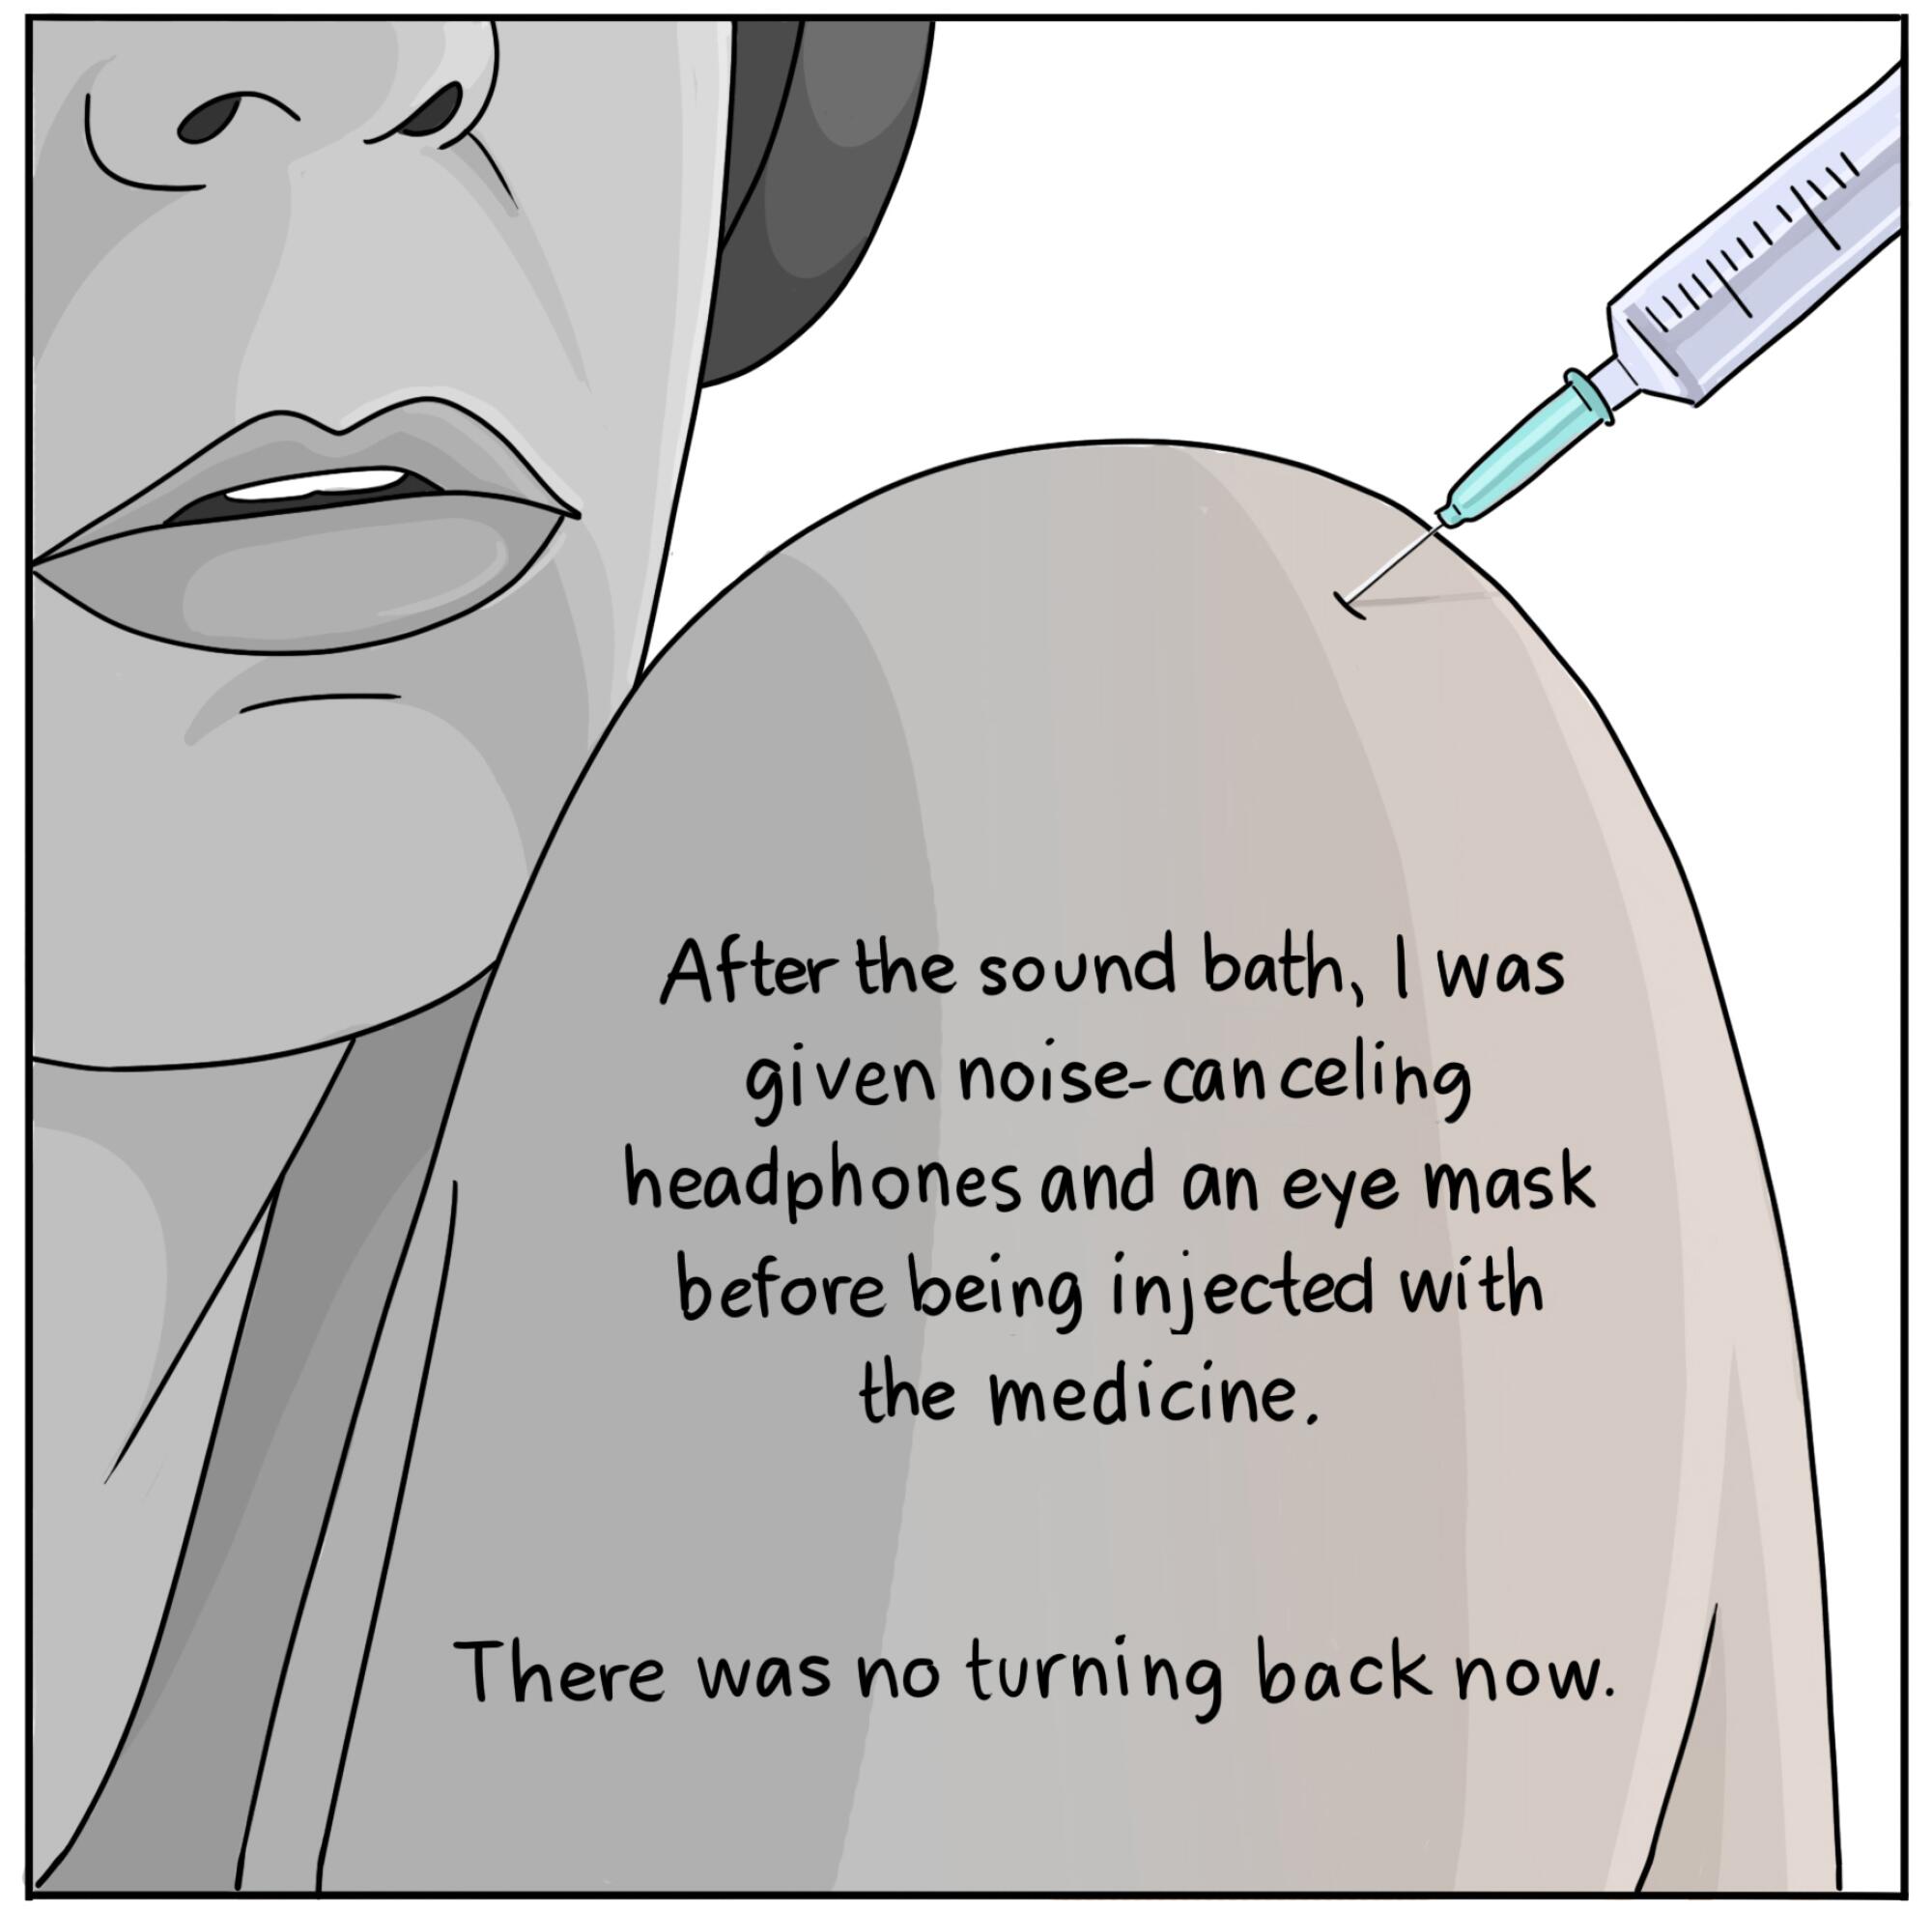 I was given noise-canceling headphones and an eye mask before being injected with the medicine. There was no turning back.